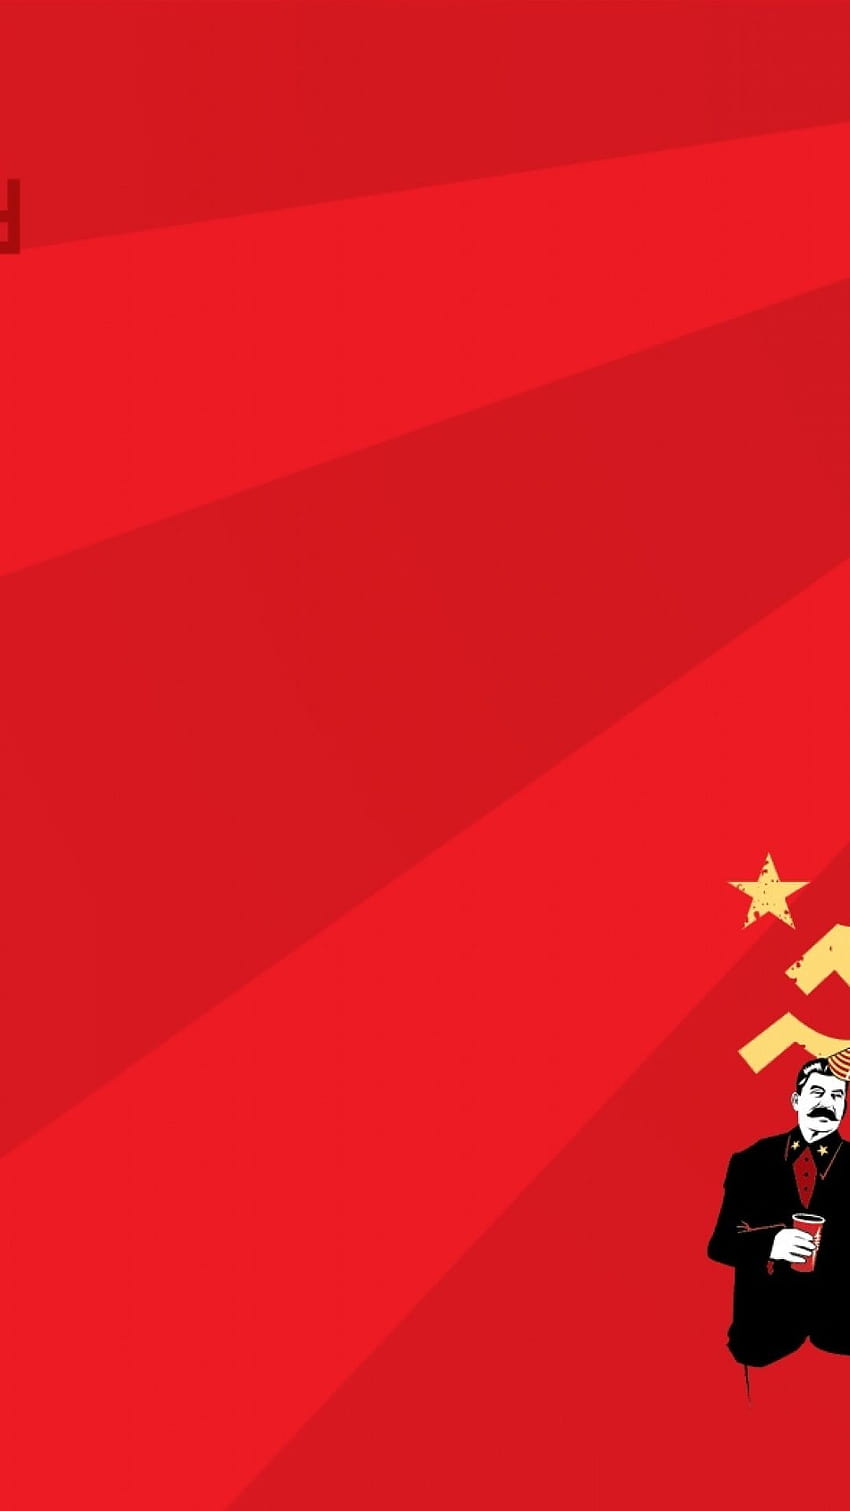 communism Linux Red background HD Wallpapers  Desktop and Mobile Images   Photos